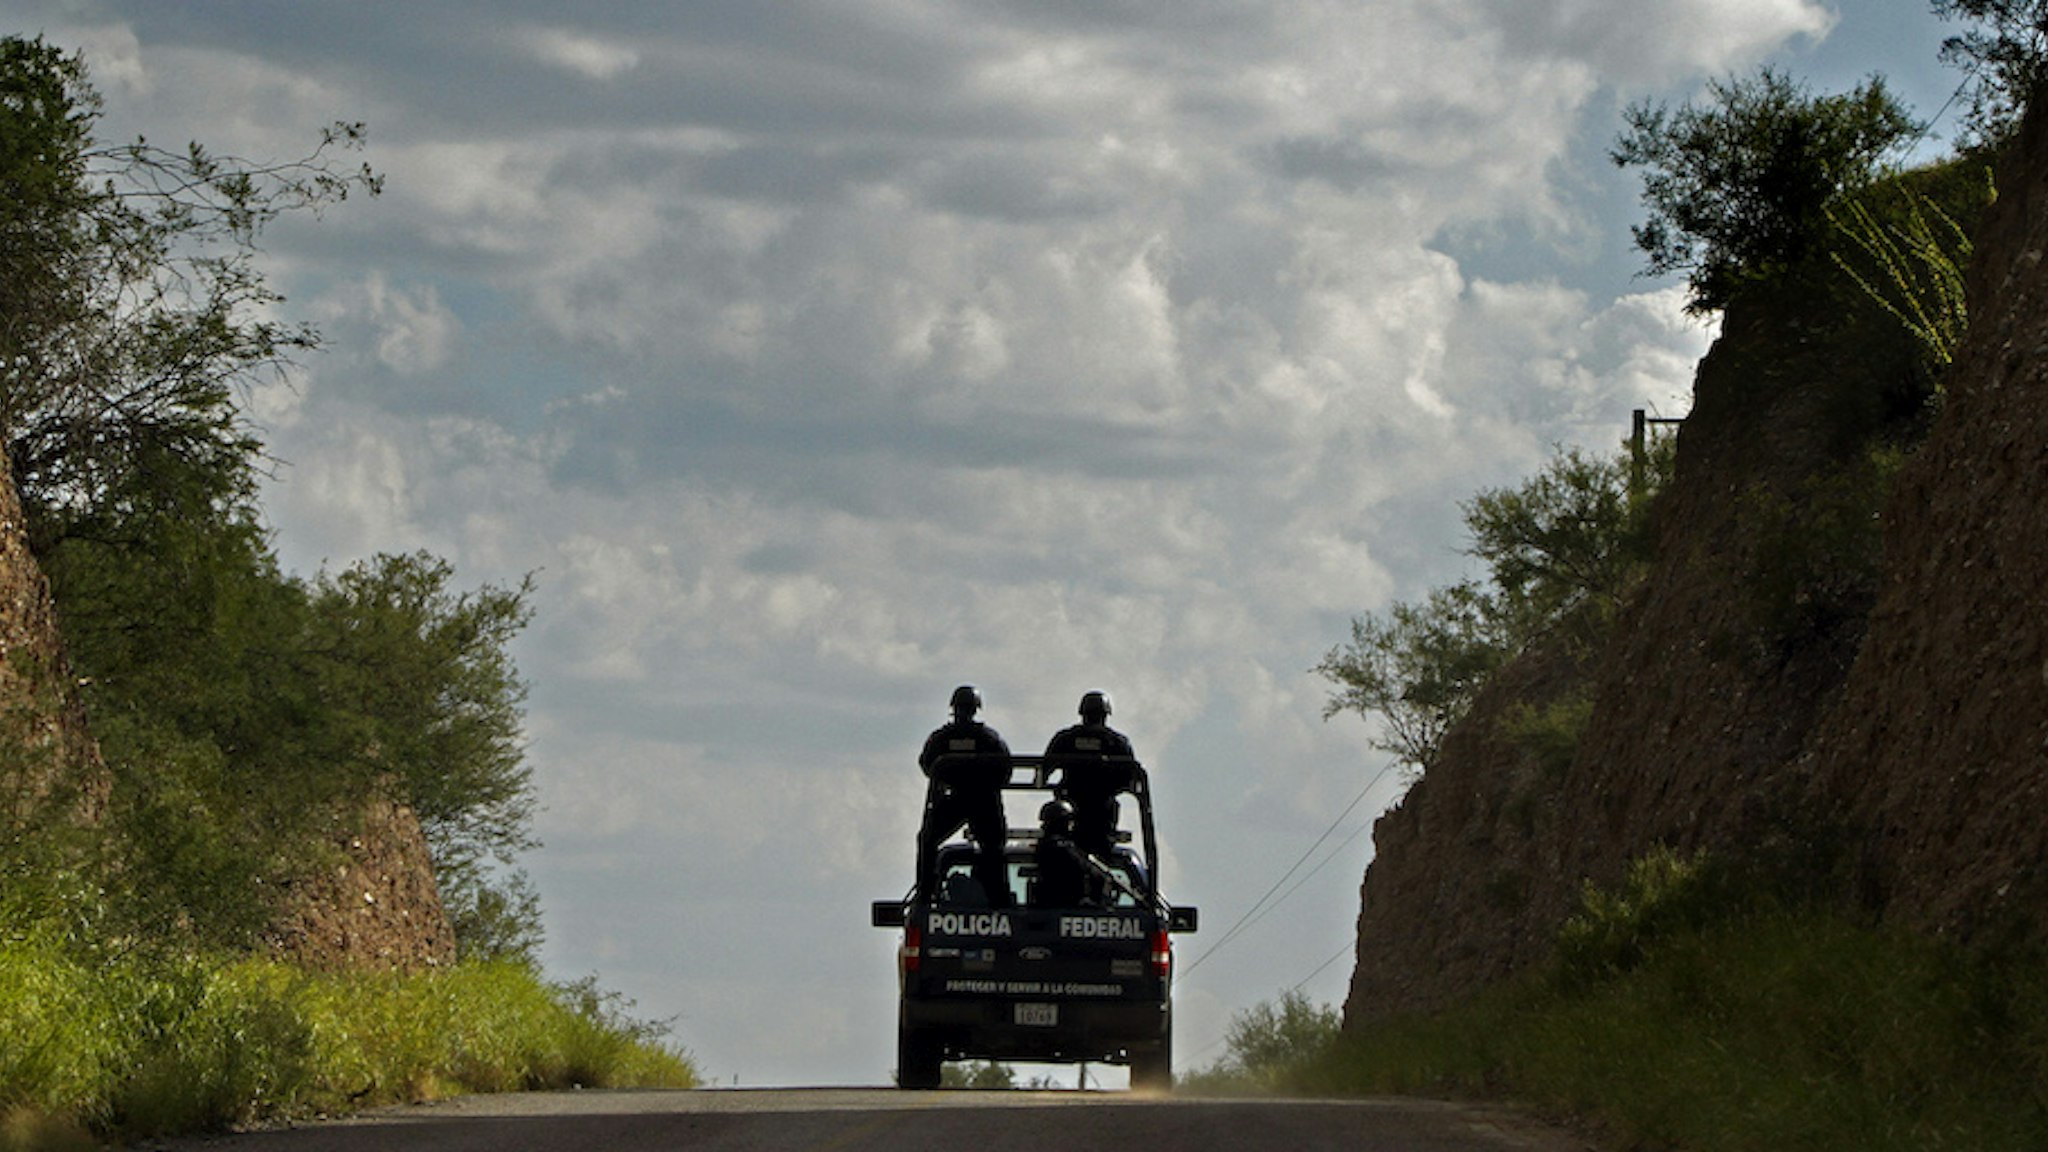 Mexican Federal Police drive through enemy territory south of the Arizona border. From the high embankments on this 2–lane desert road the Beltran–Leyva drug cartel gunmen ambushed and killed 21 Sinaloa Cartel gunmen in July, 2010. (Don Bartletti / Los Angeles Times)